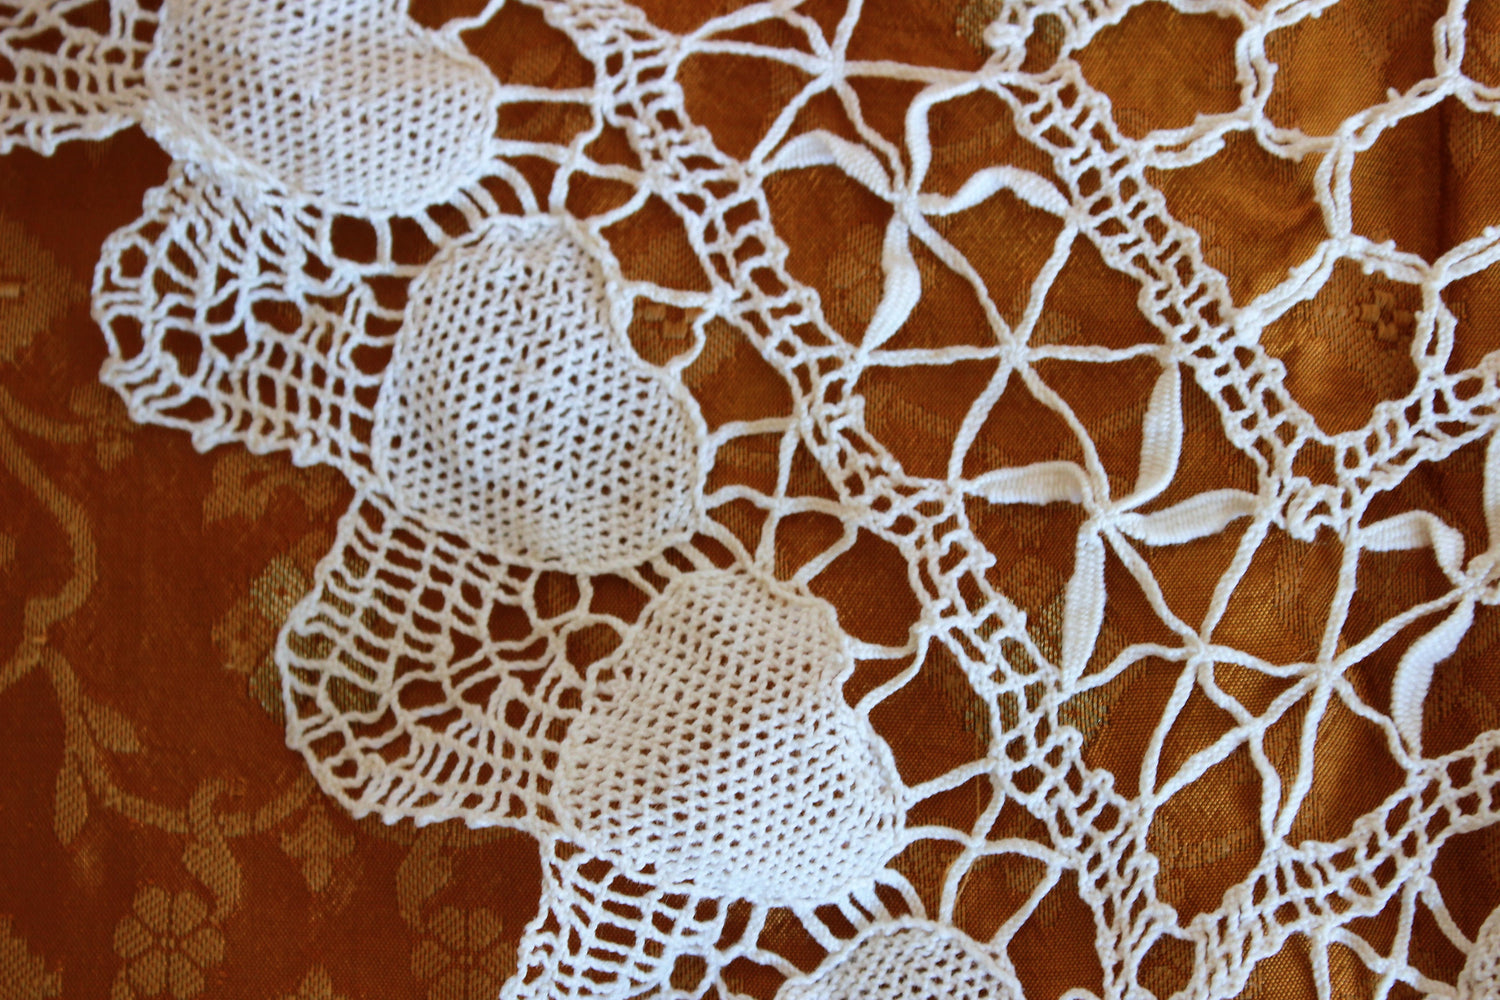 Vintage Lace Doily Or Placemat In Ivory With Crochet Hearts